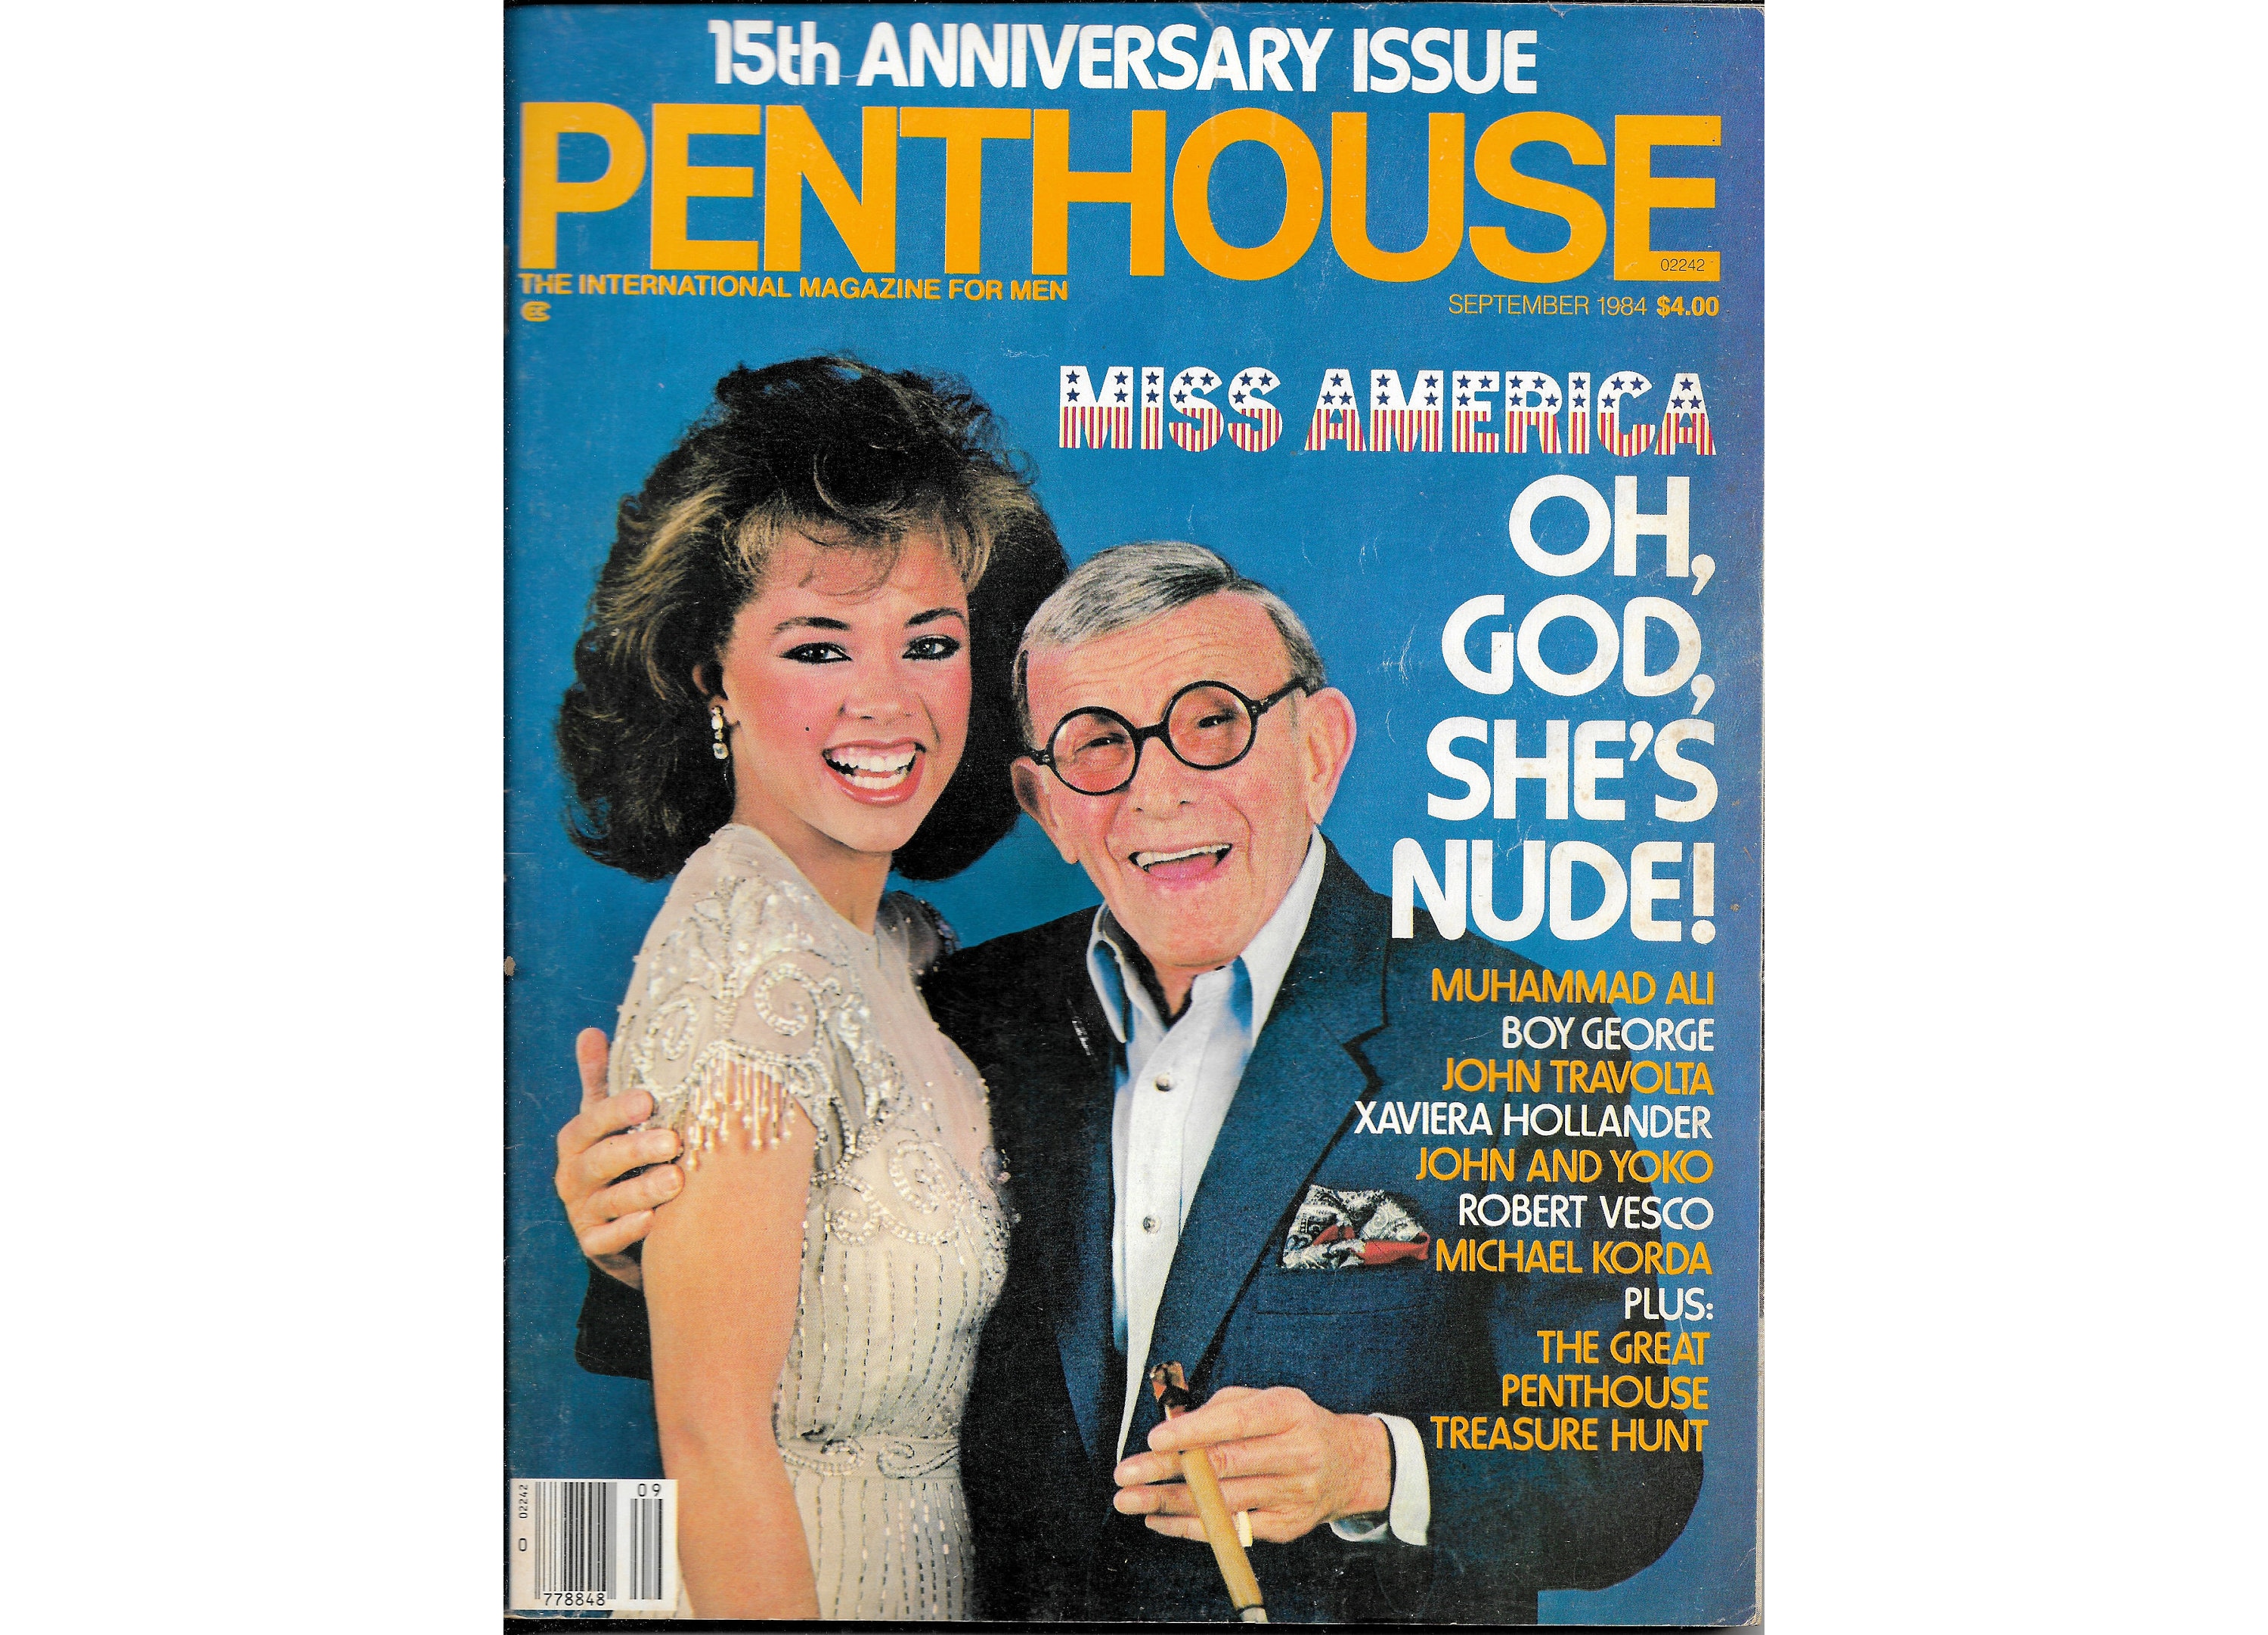 christopher bryce alexander recommends Vanessa Williams Penthouse Magazine